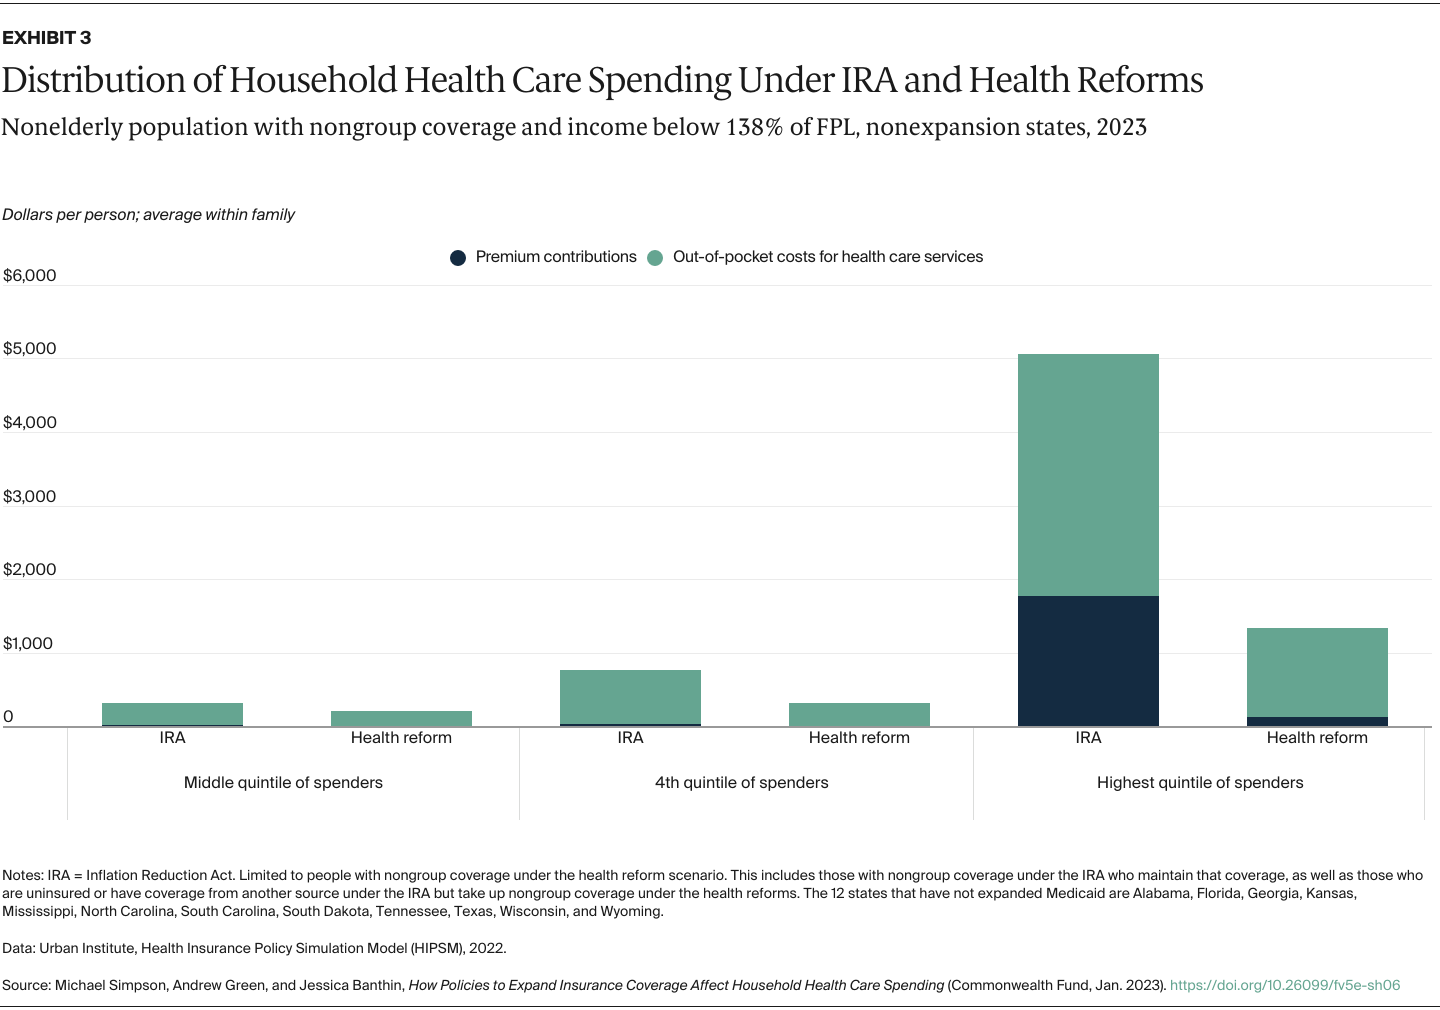 Simpson_policies_expand_coverage_household_spending_Exhibit_03